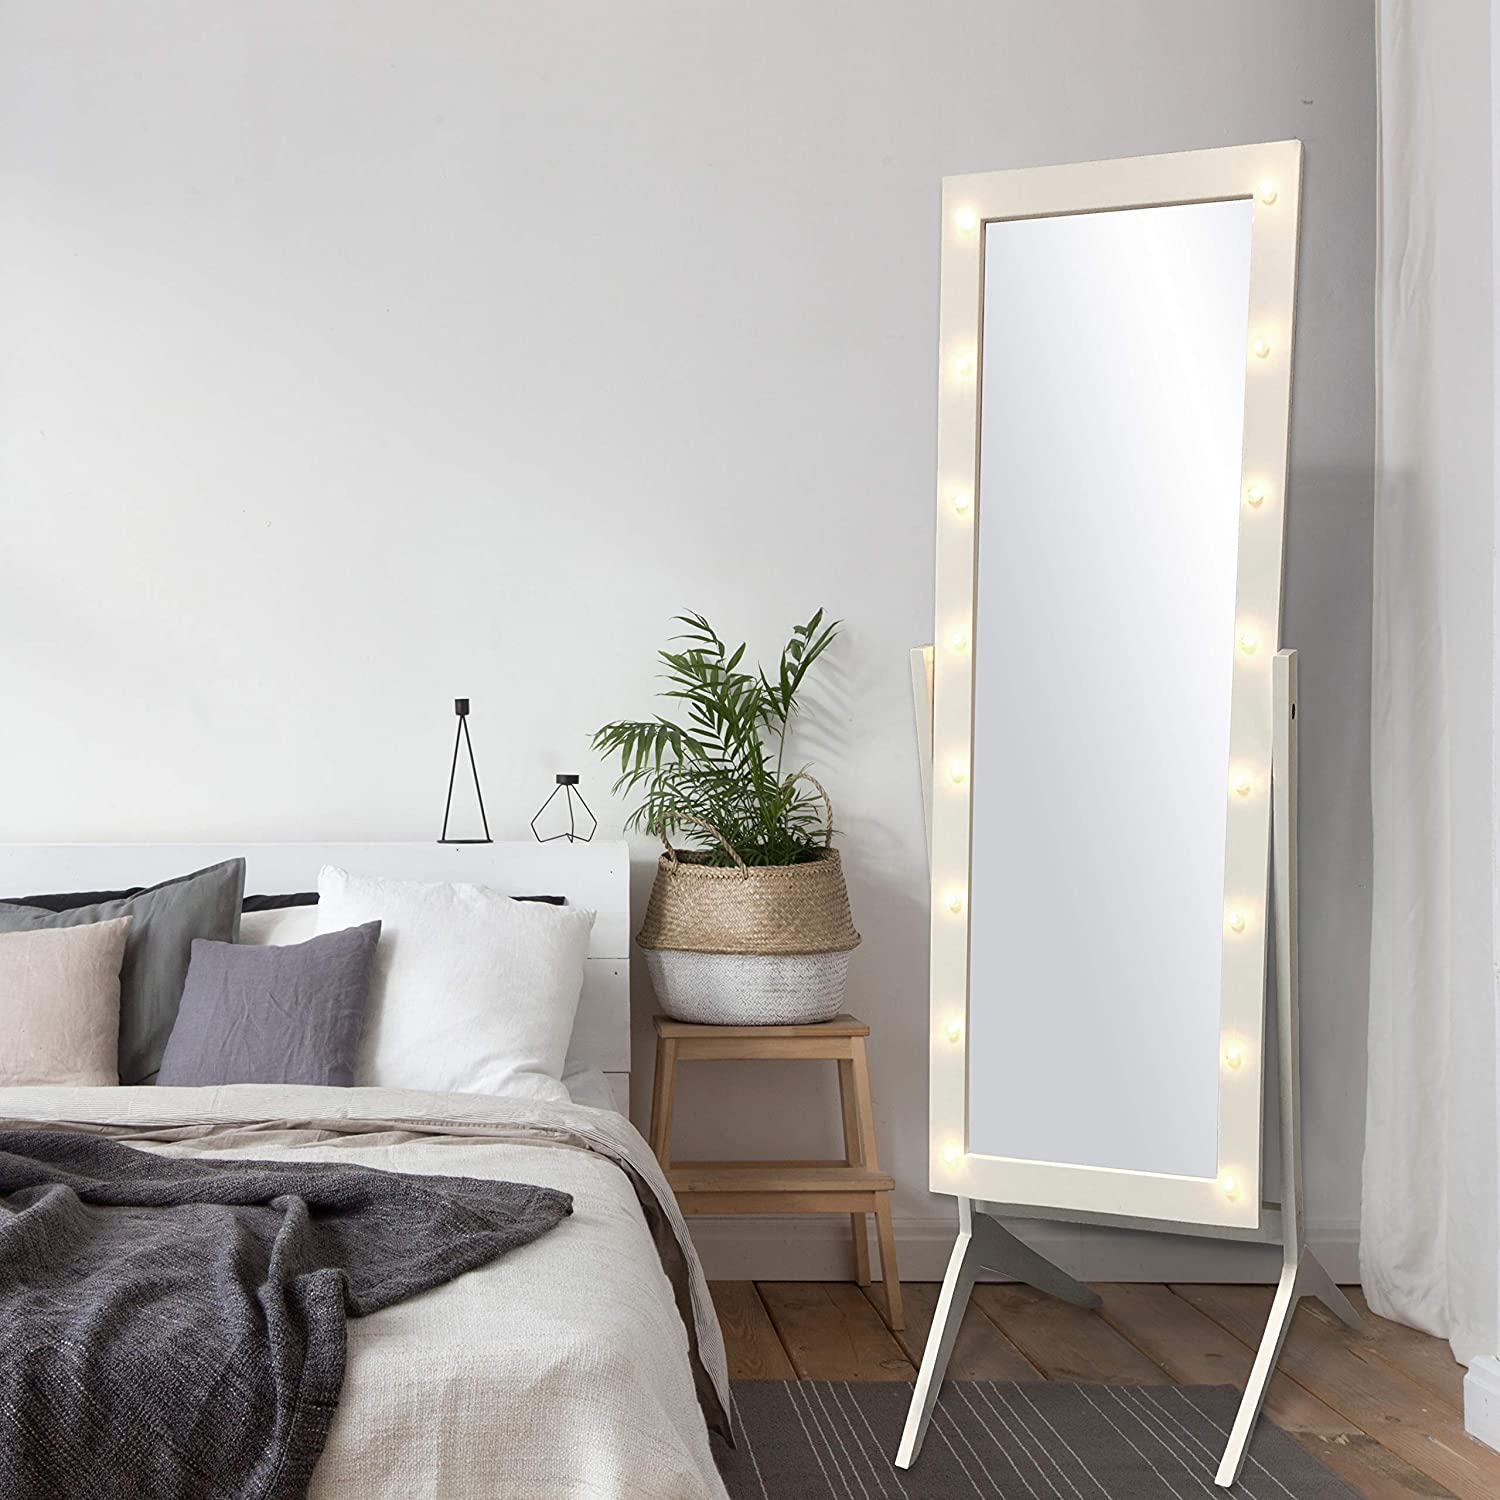 LED Lights for Your Bedroom Mirror